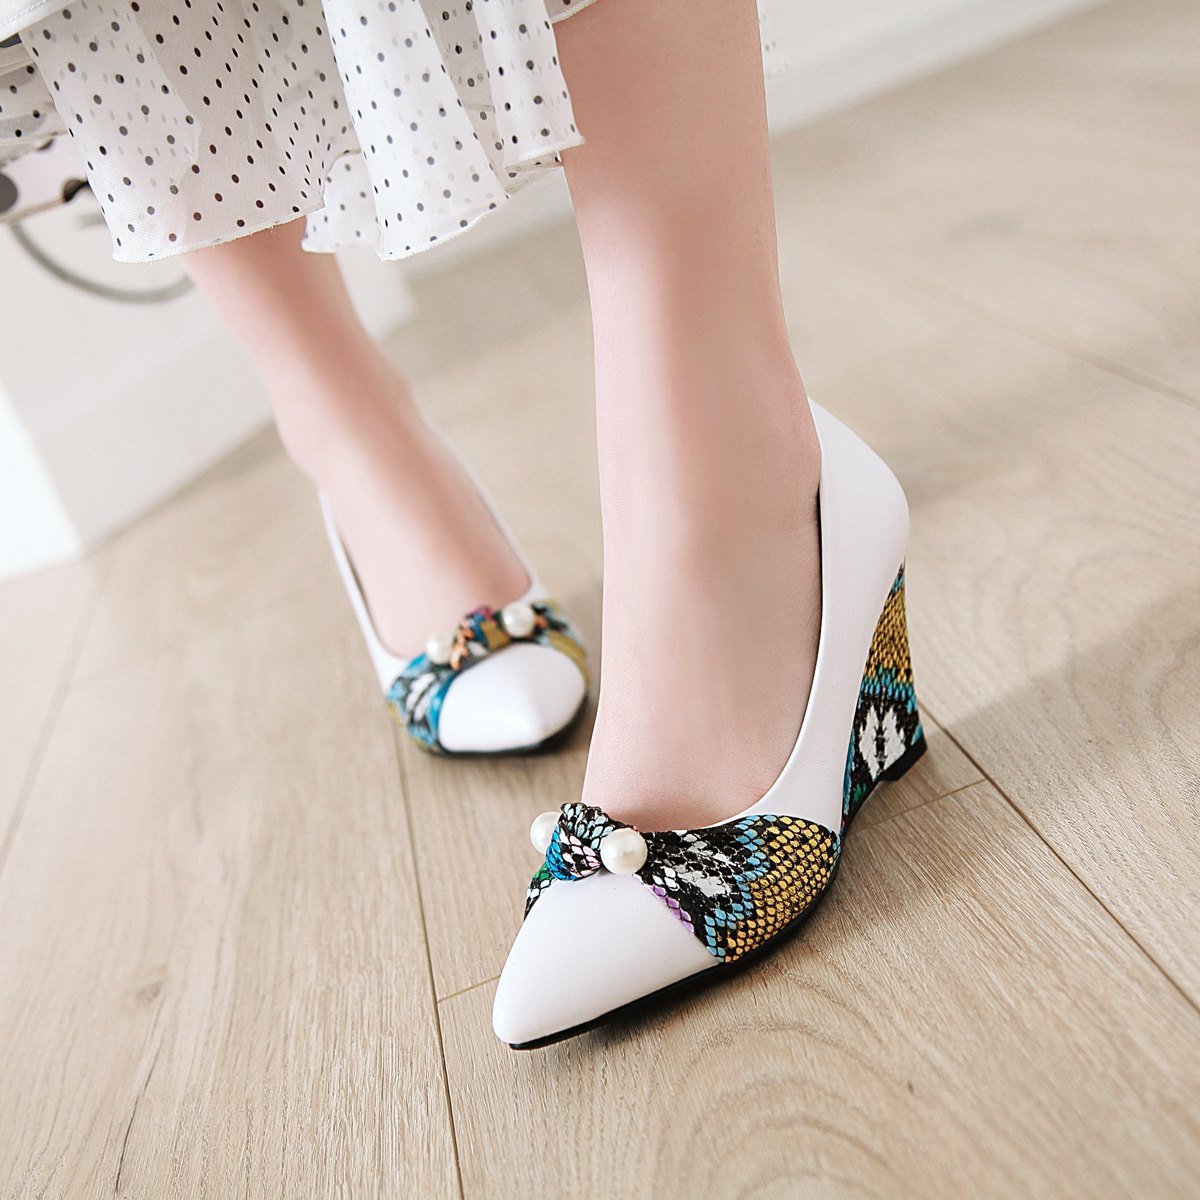 Lady Pattern High-heeled Slope-heeled 33-43 Plus Size Shallow-mouthed Wedges Shoes